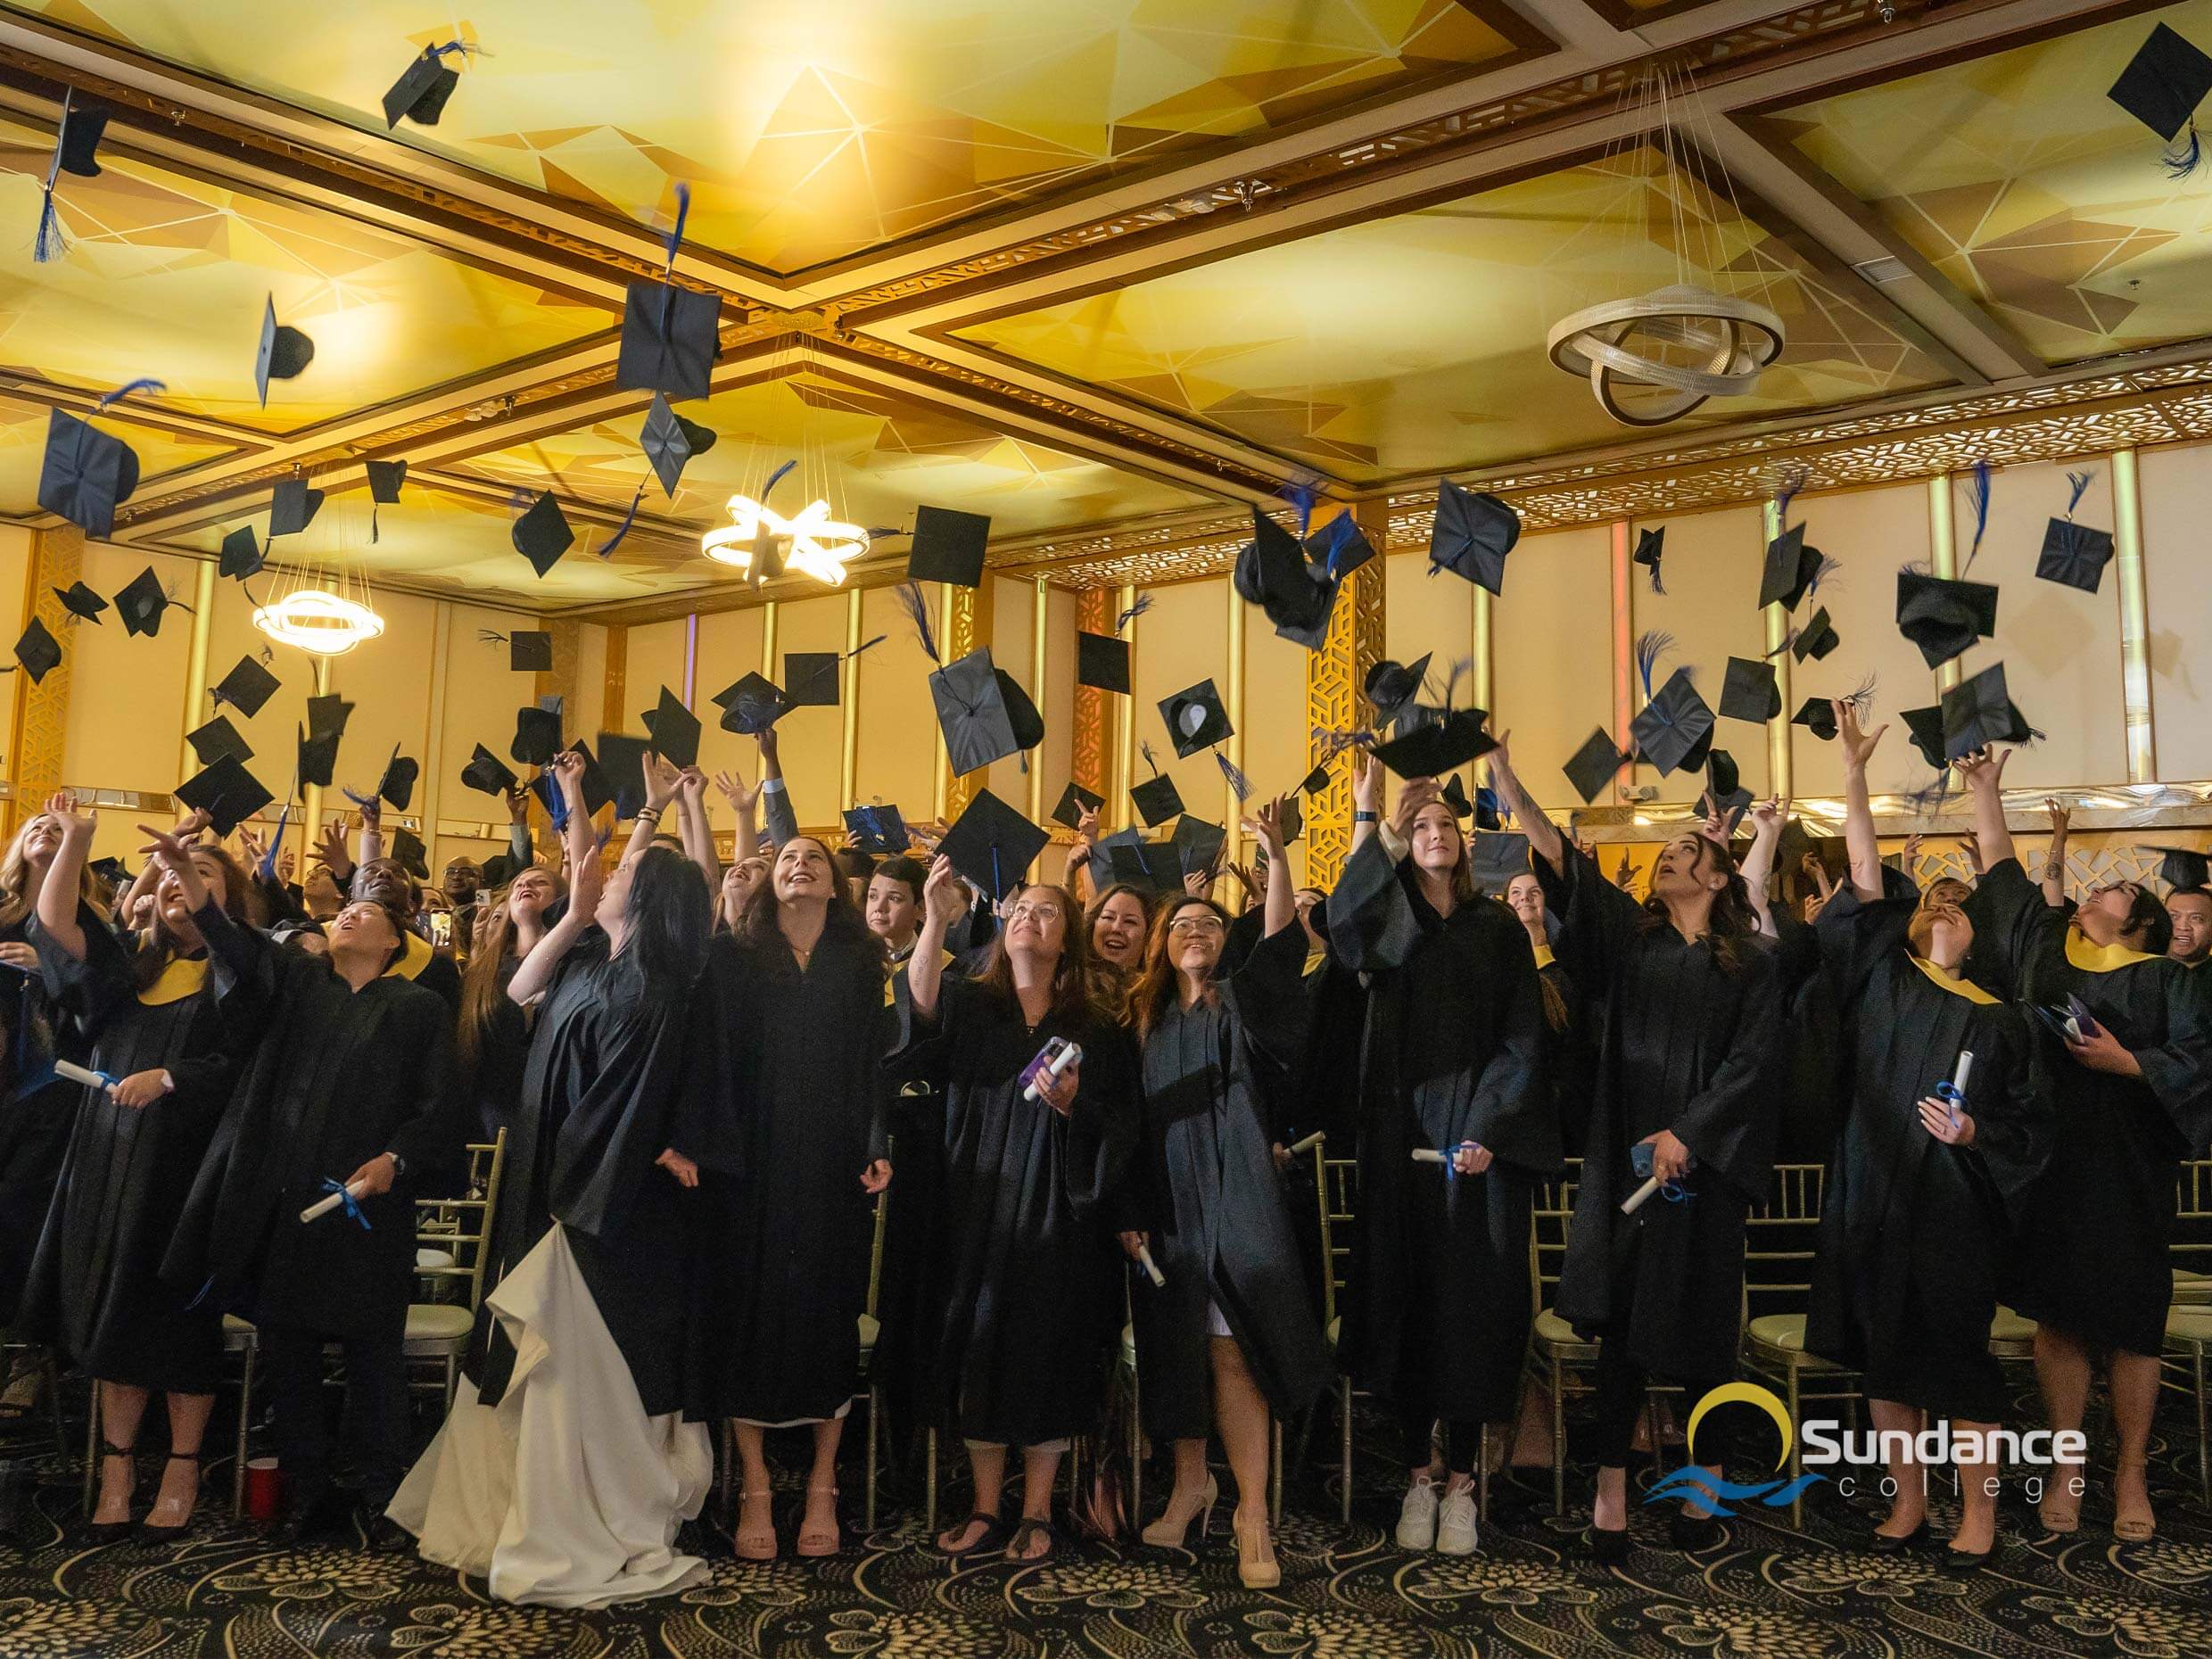 accounting diploma graduates in graduation gowns from Sundance College, throwing graduation caps in air joyfully